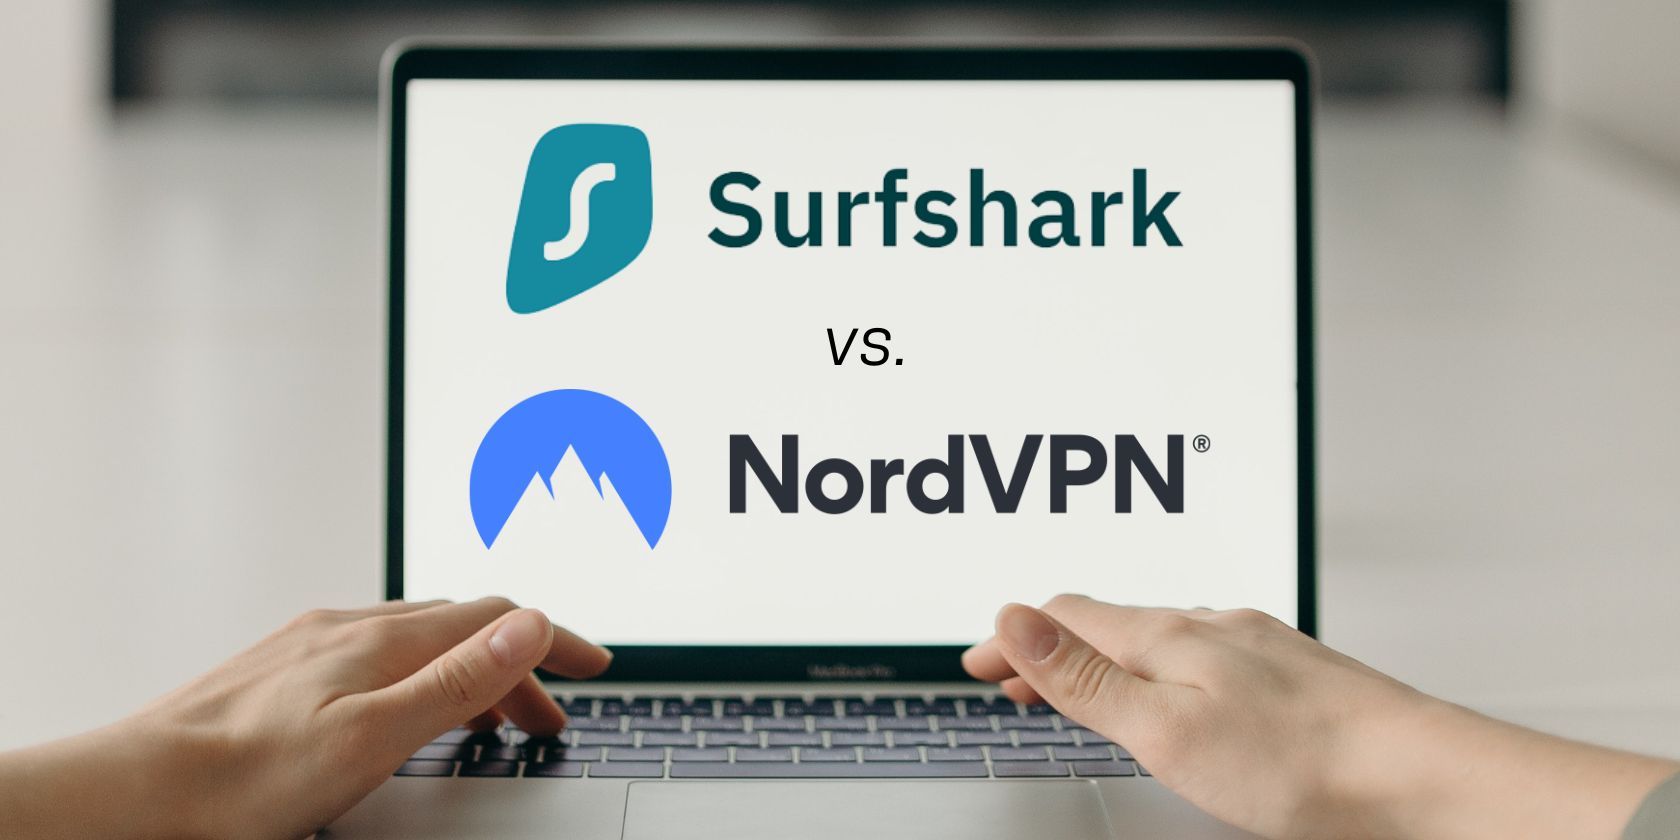 surfshark and nord vpn logos on laptop being used by person 